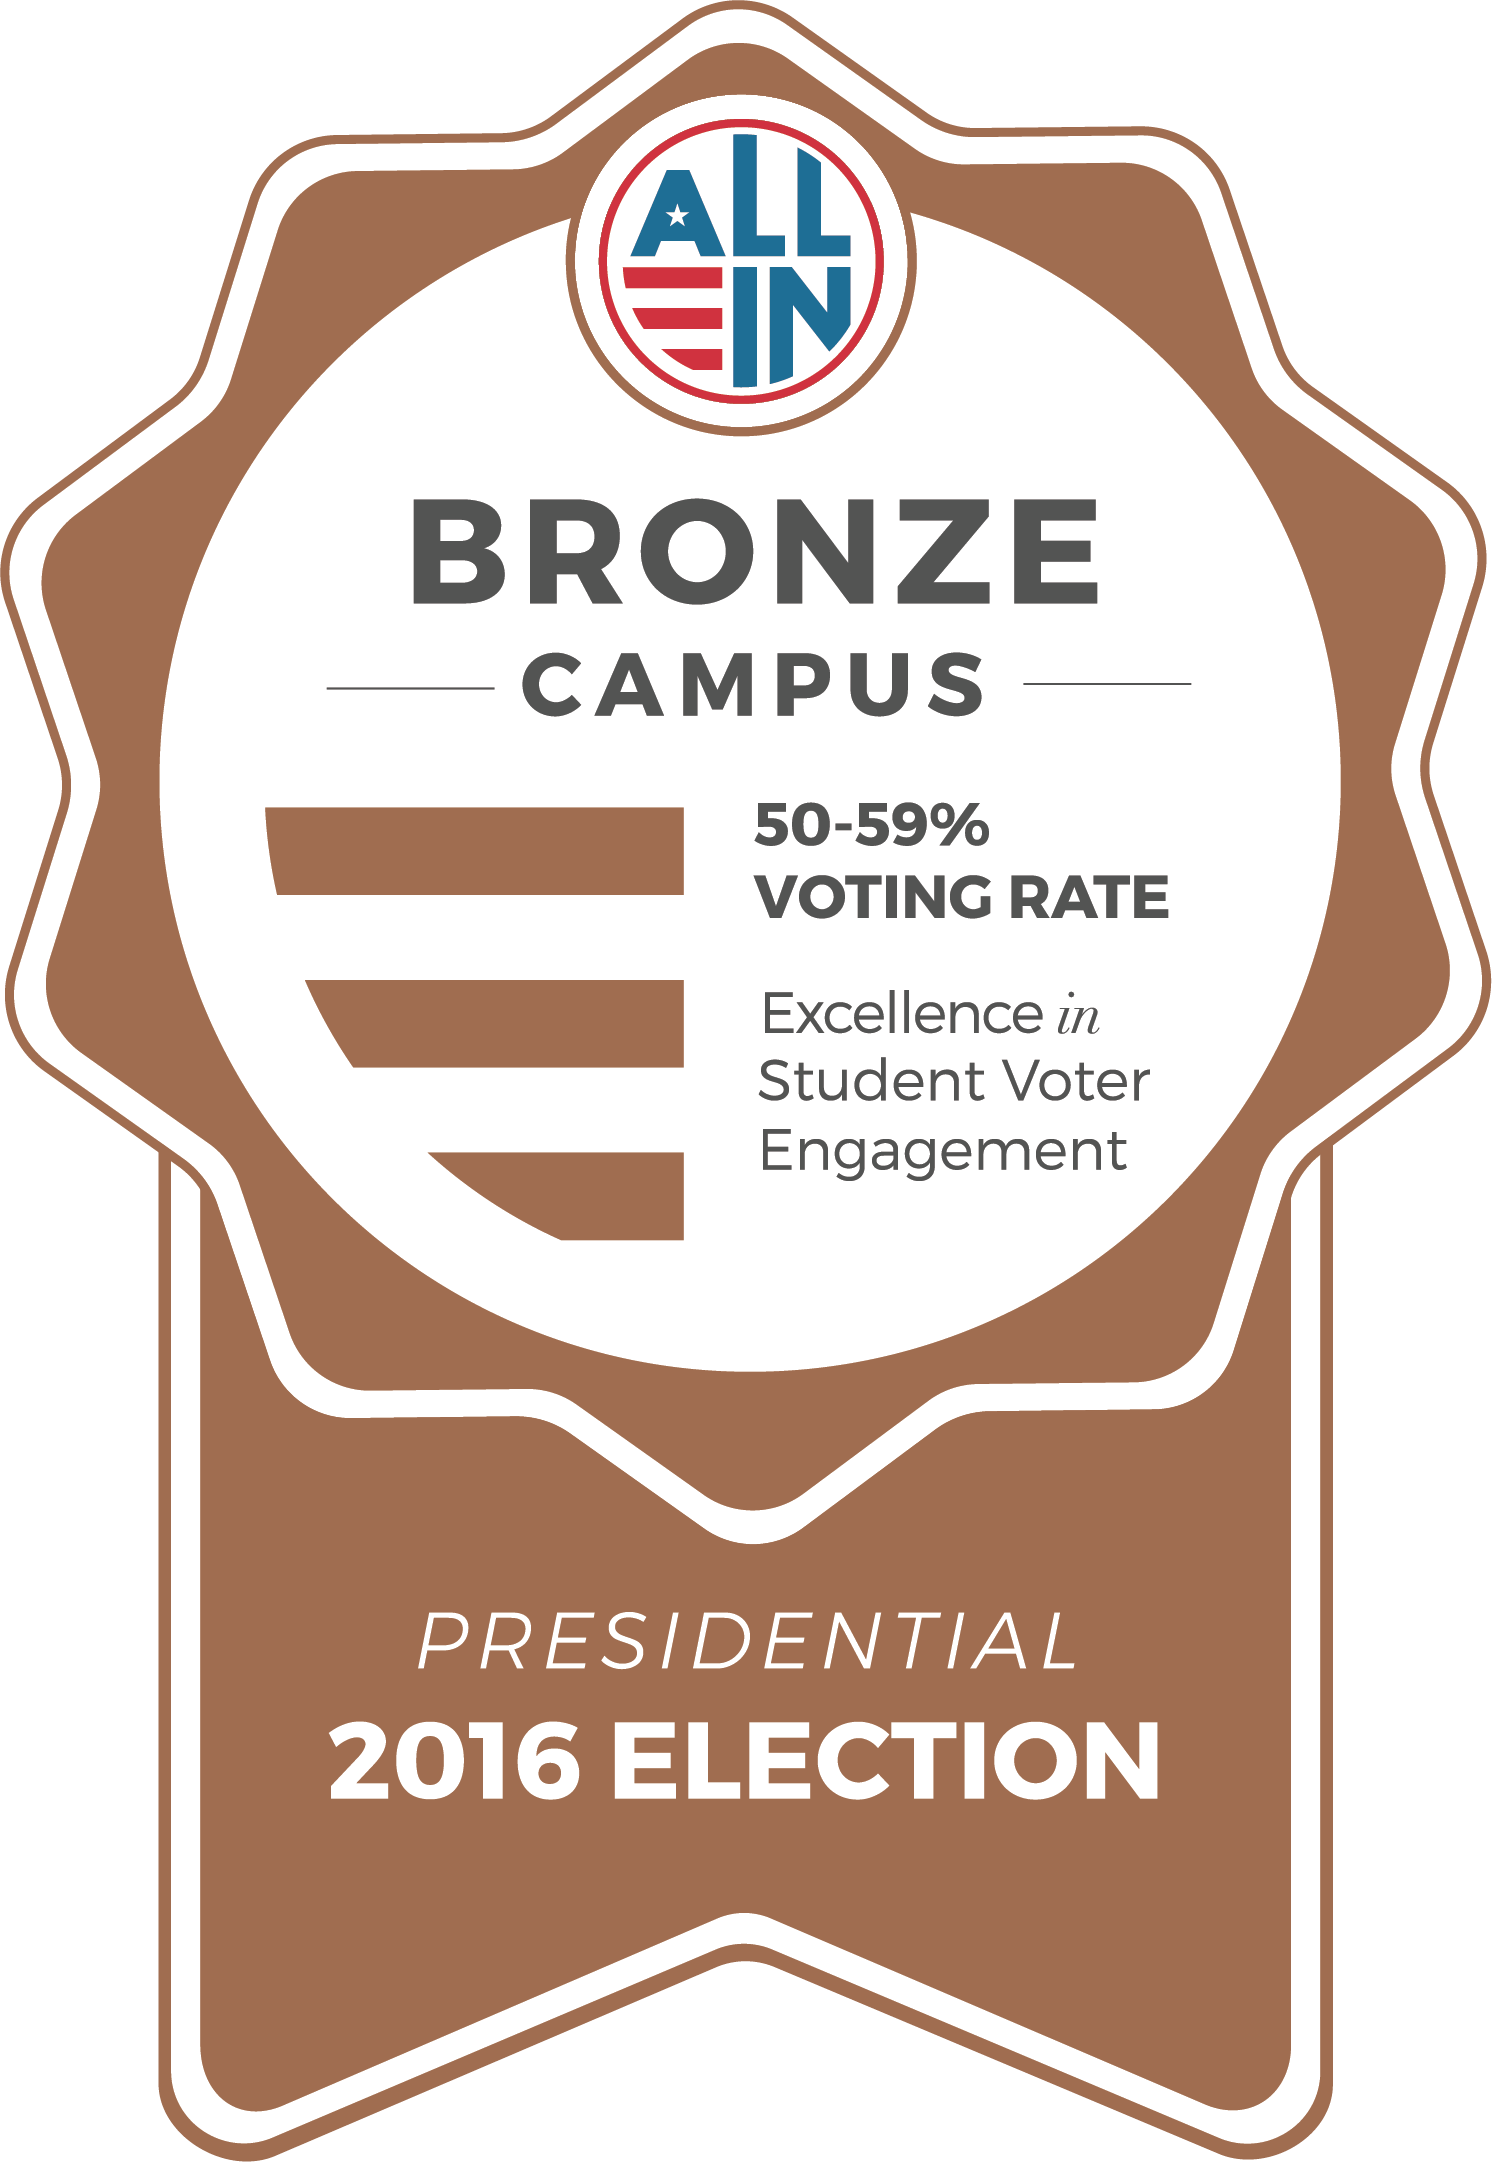 All In Bronze Campus 50-59% voting rate. Excellence in Student Voter Engagement. Presidential 2016 Election.